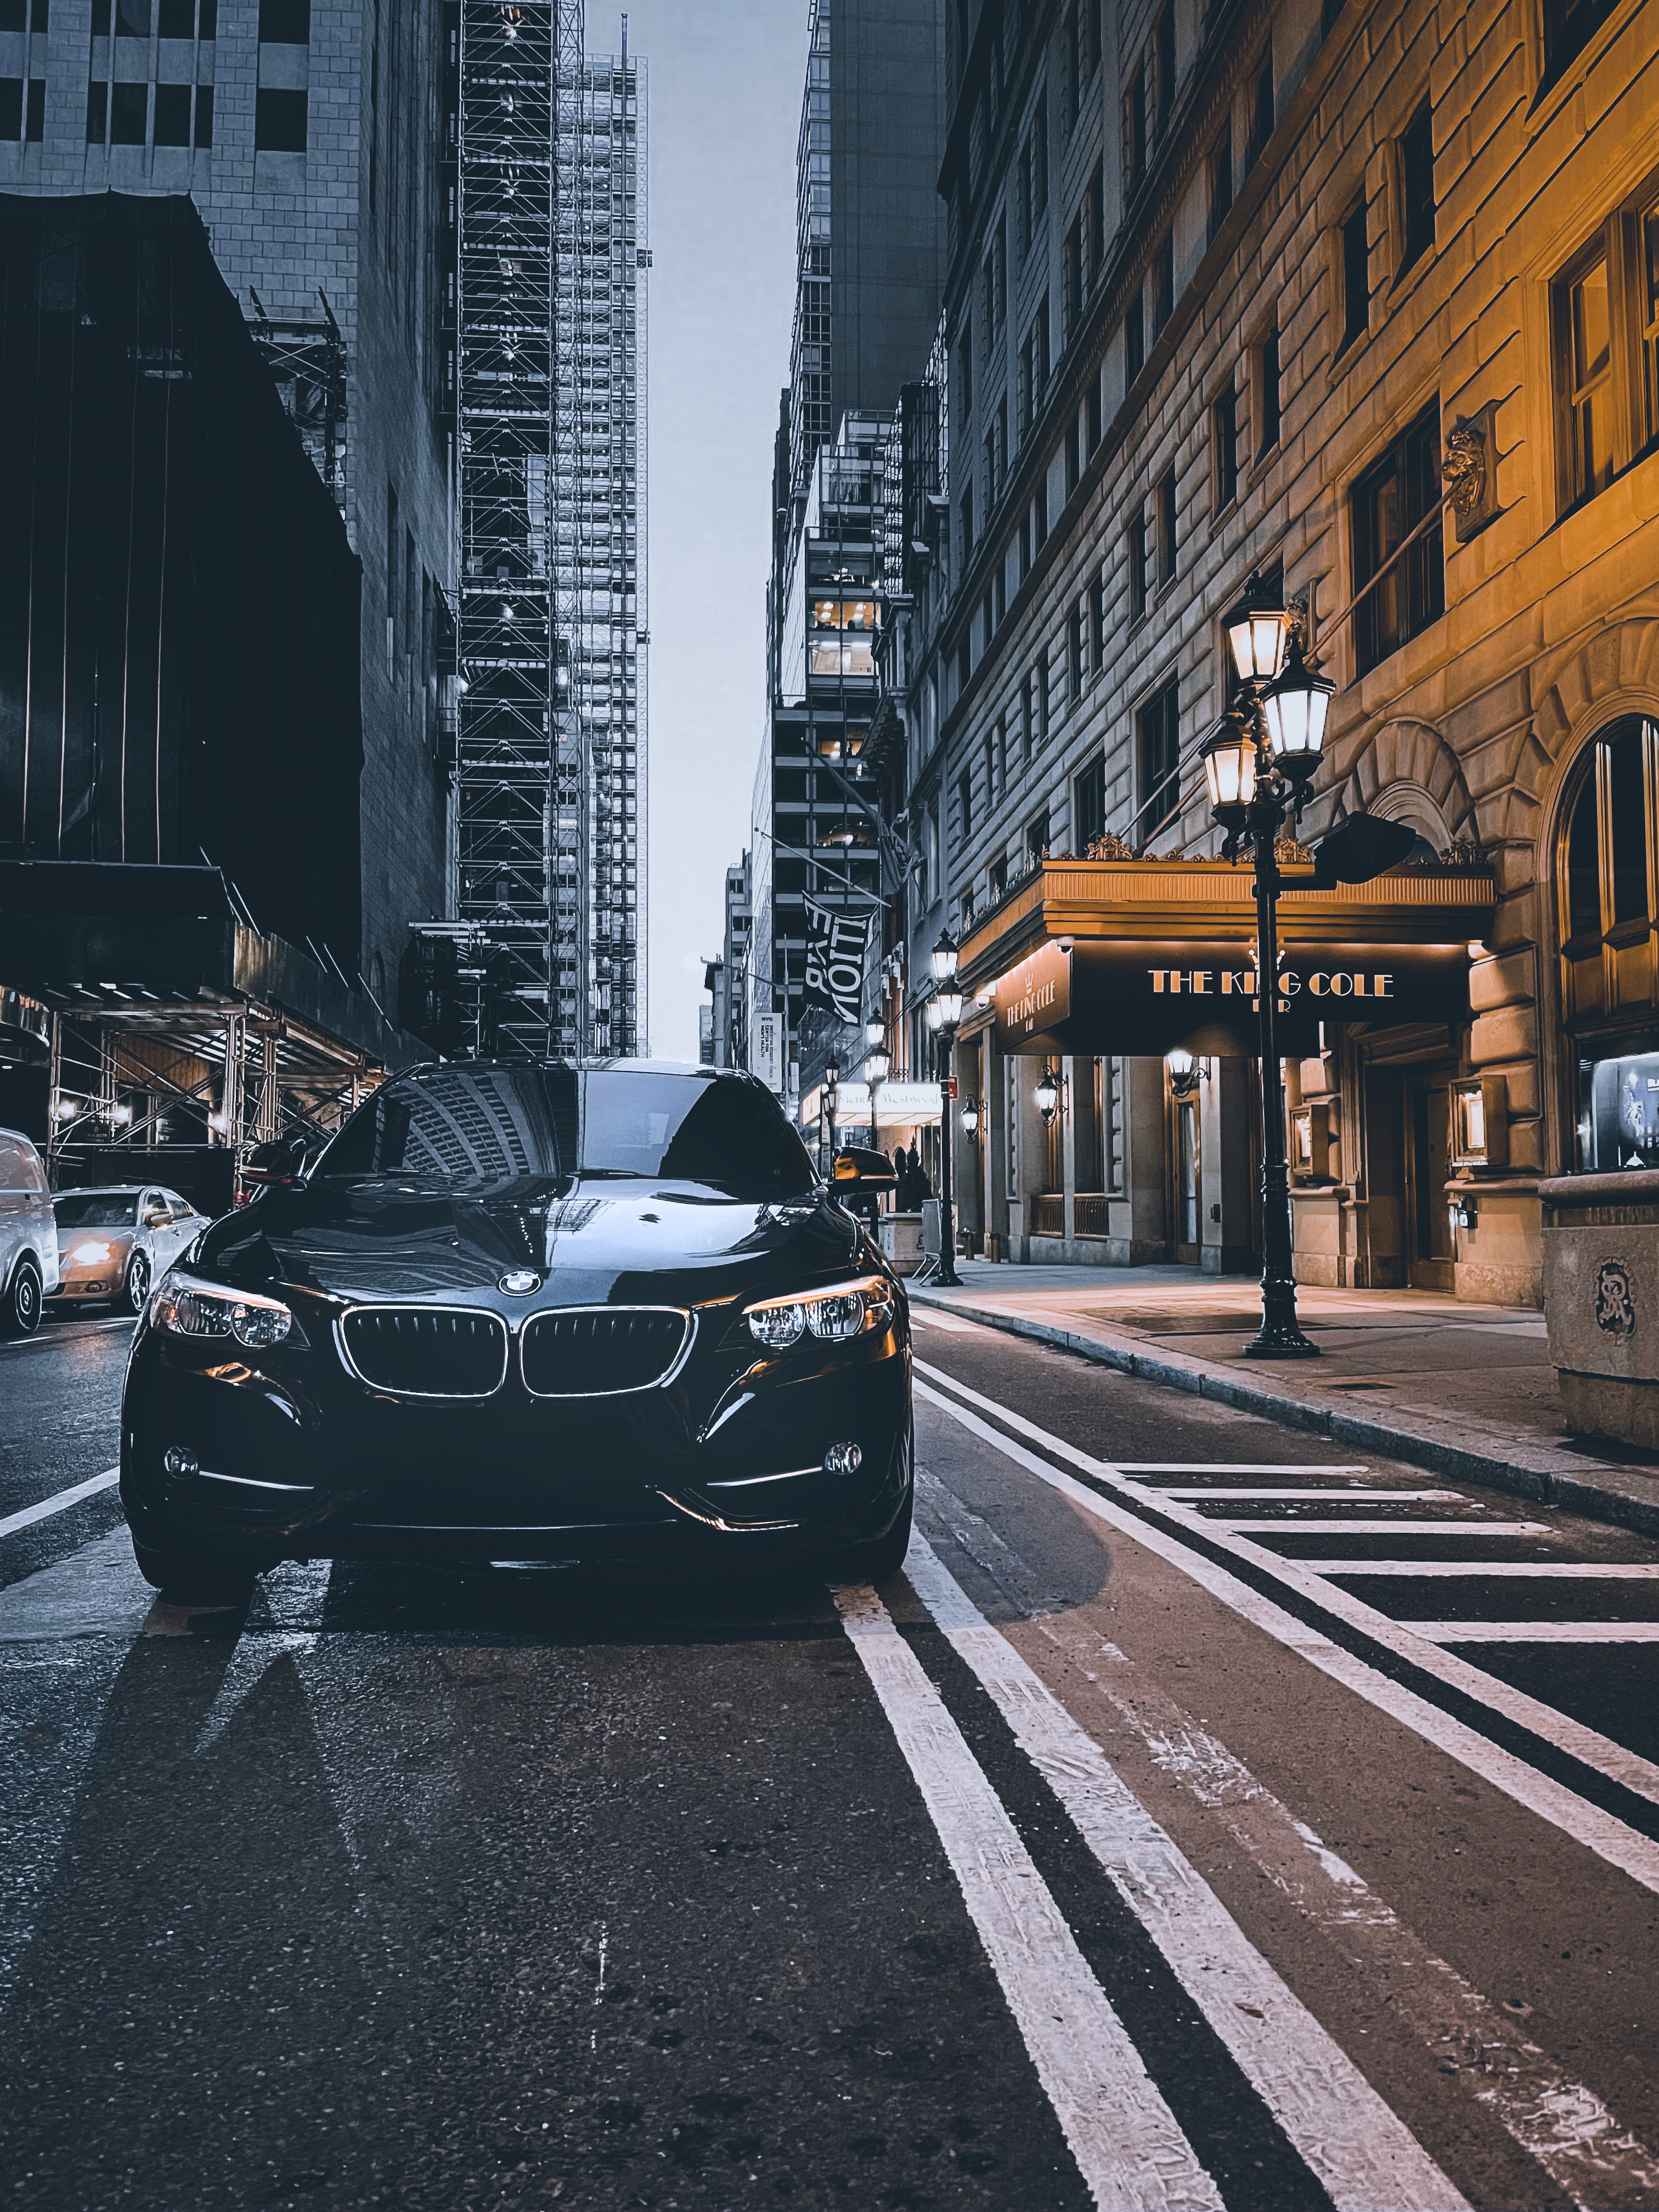 Best Bmw Background for mobile